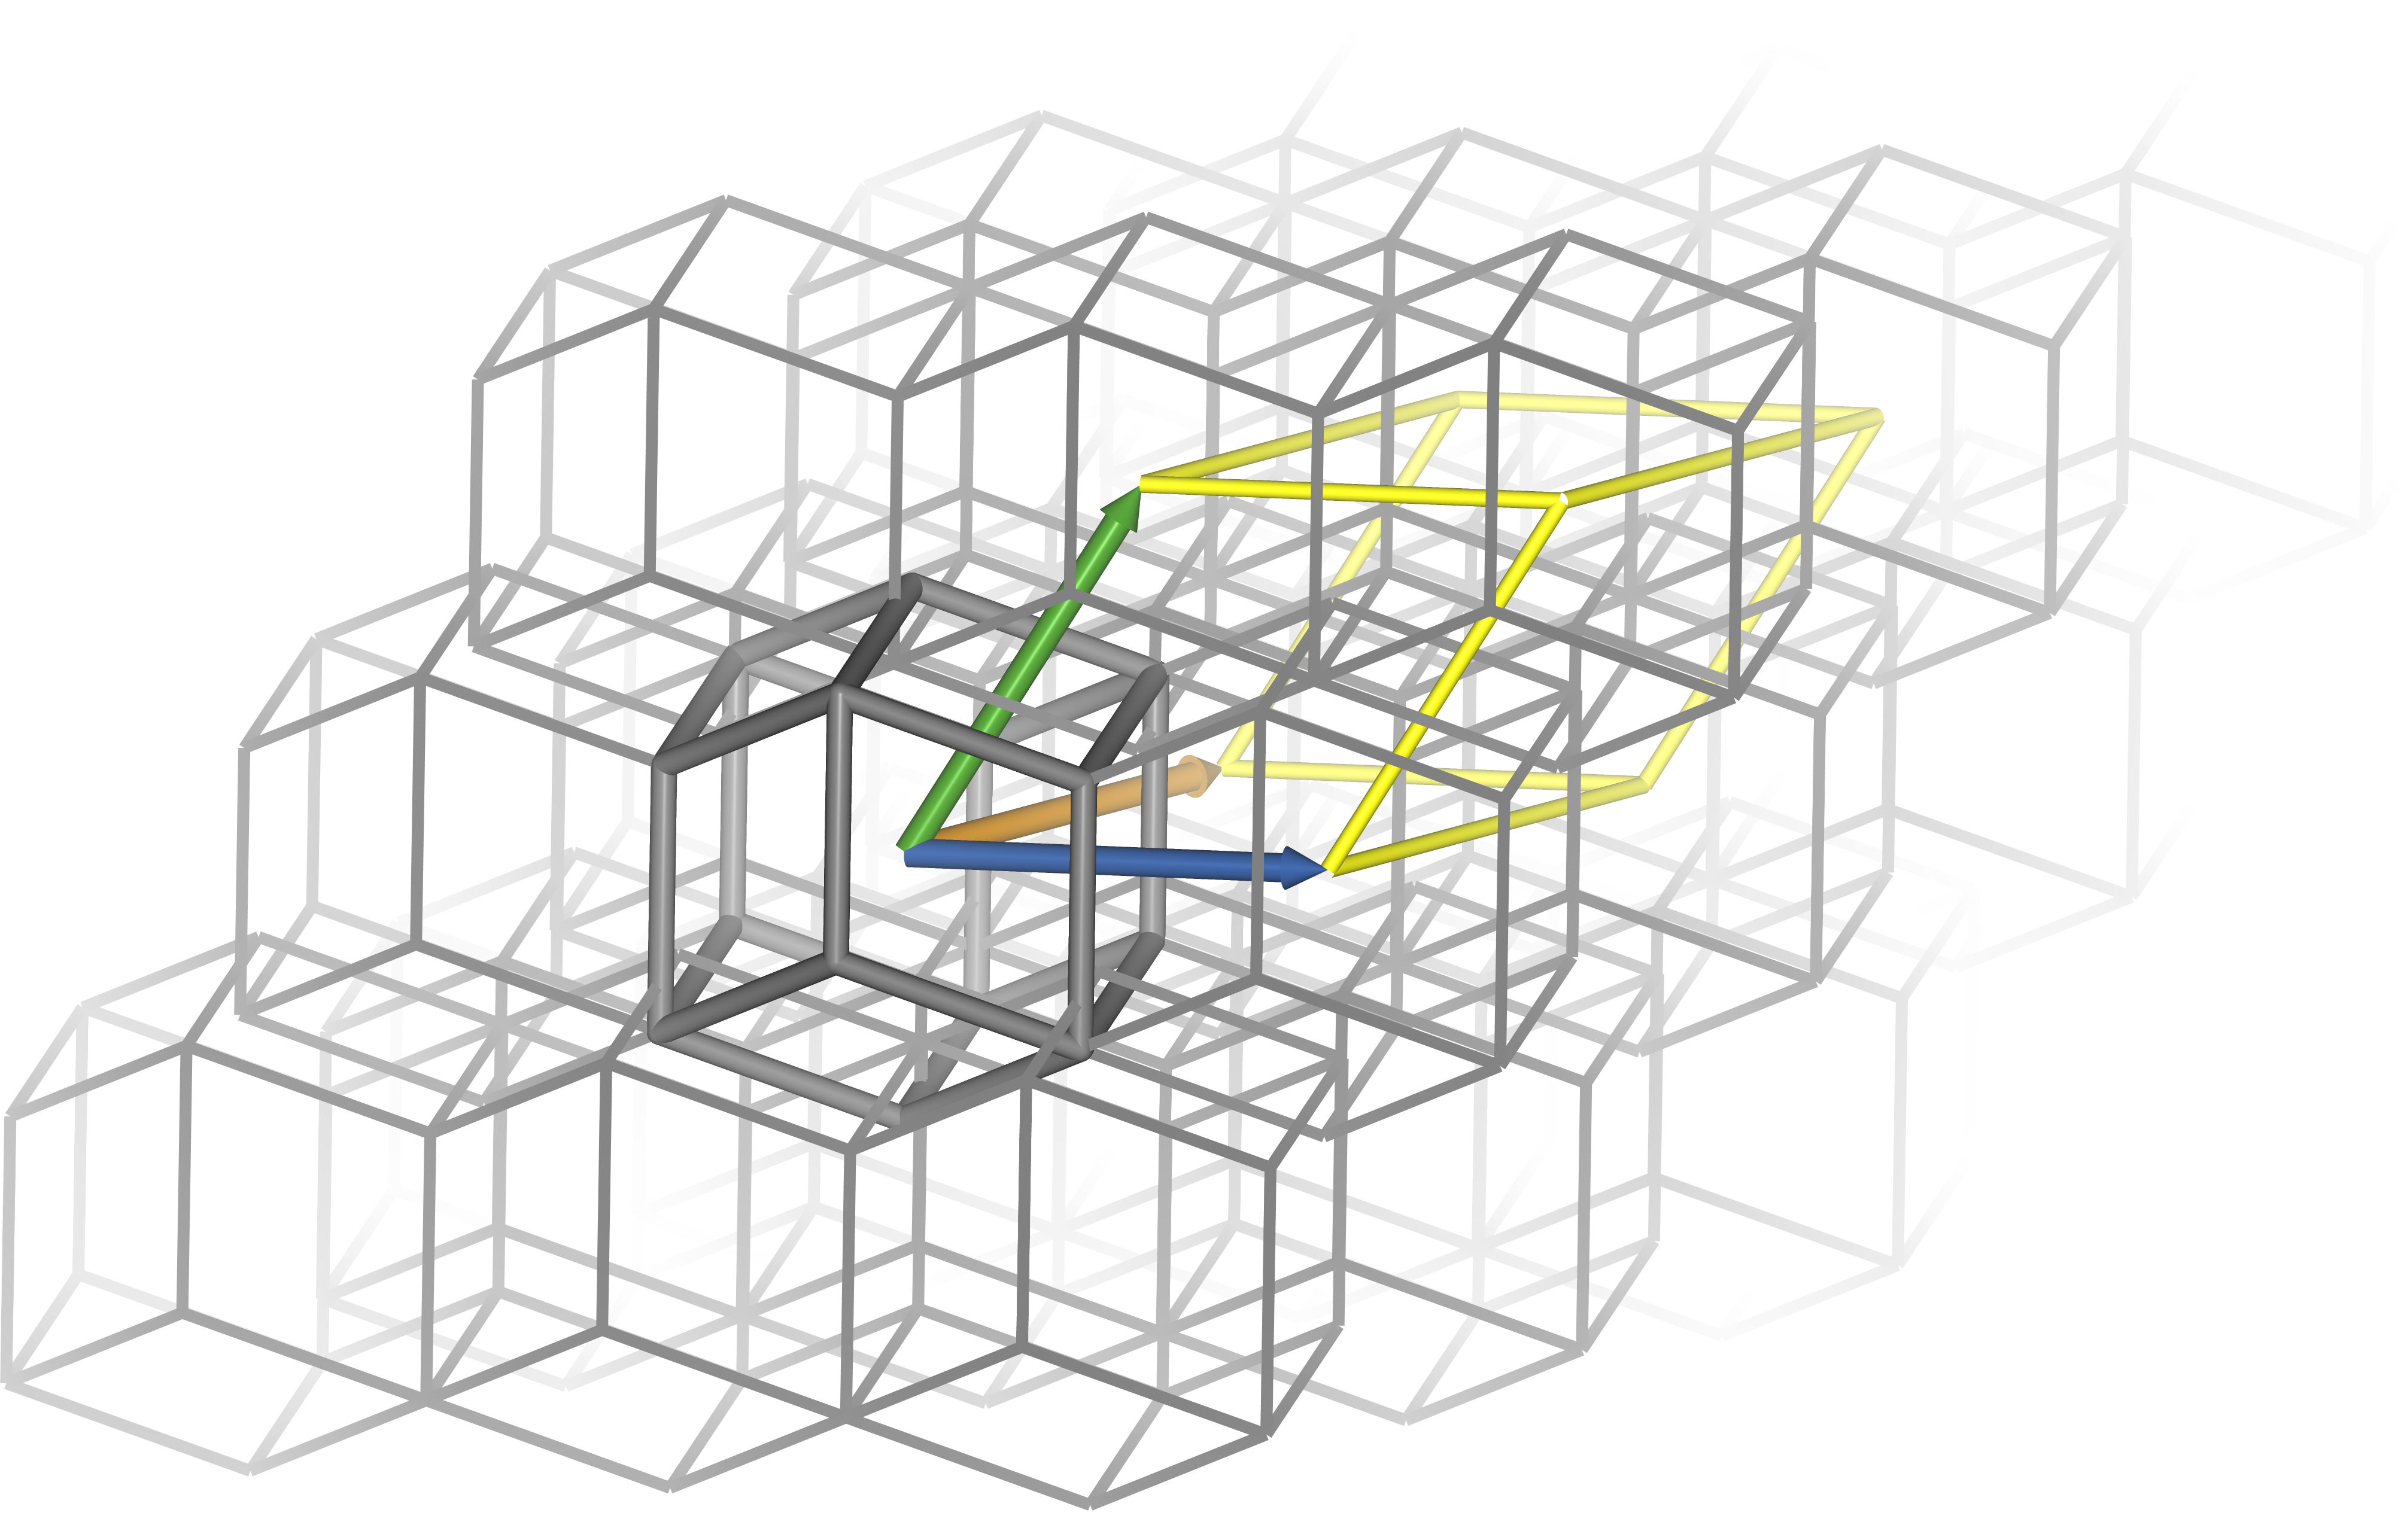 Periodic boundary conditions with a rhombic dodecahedral box